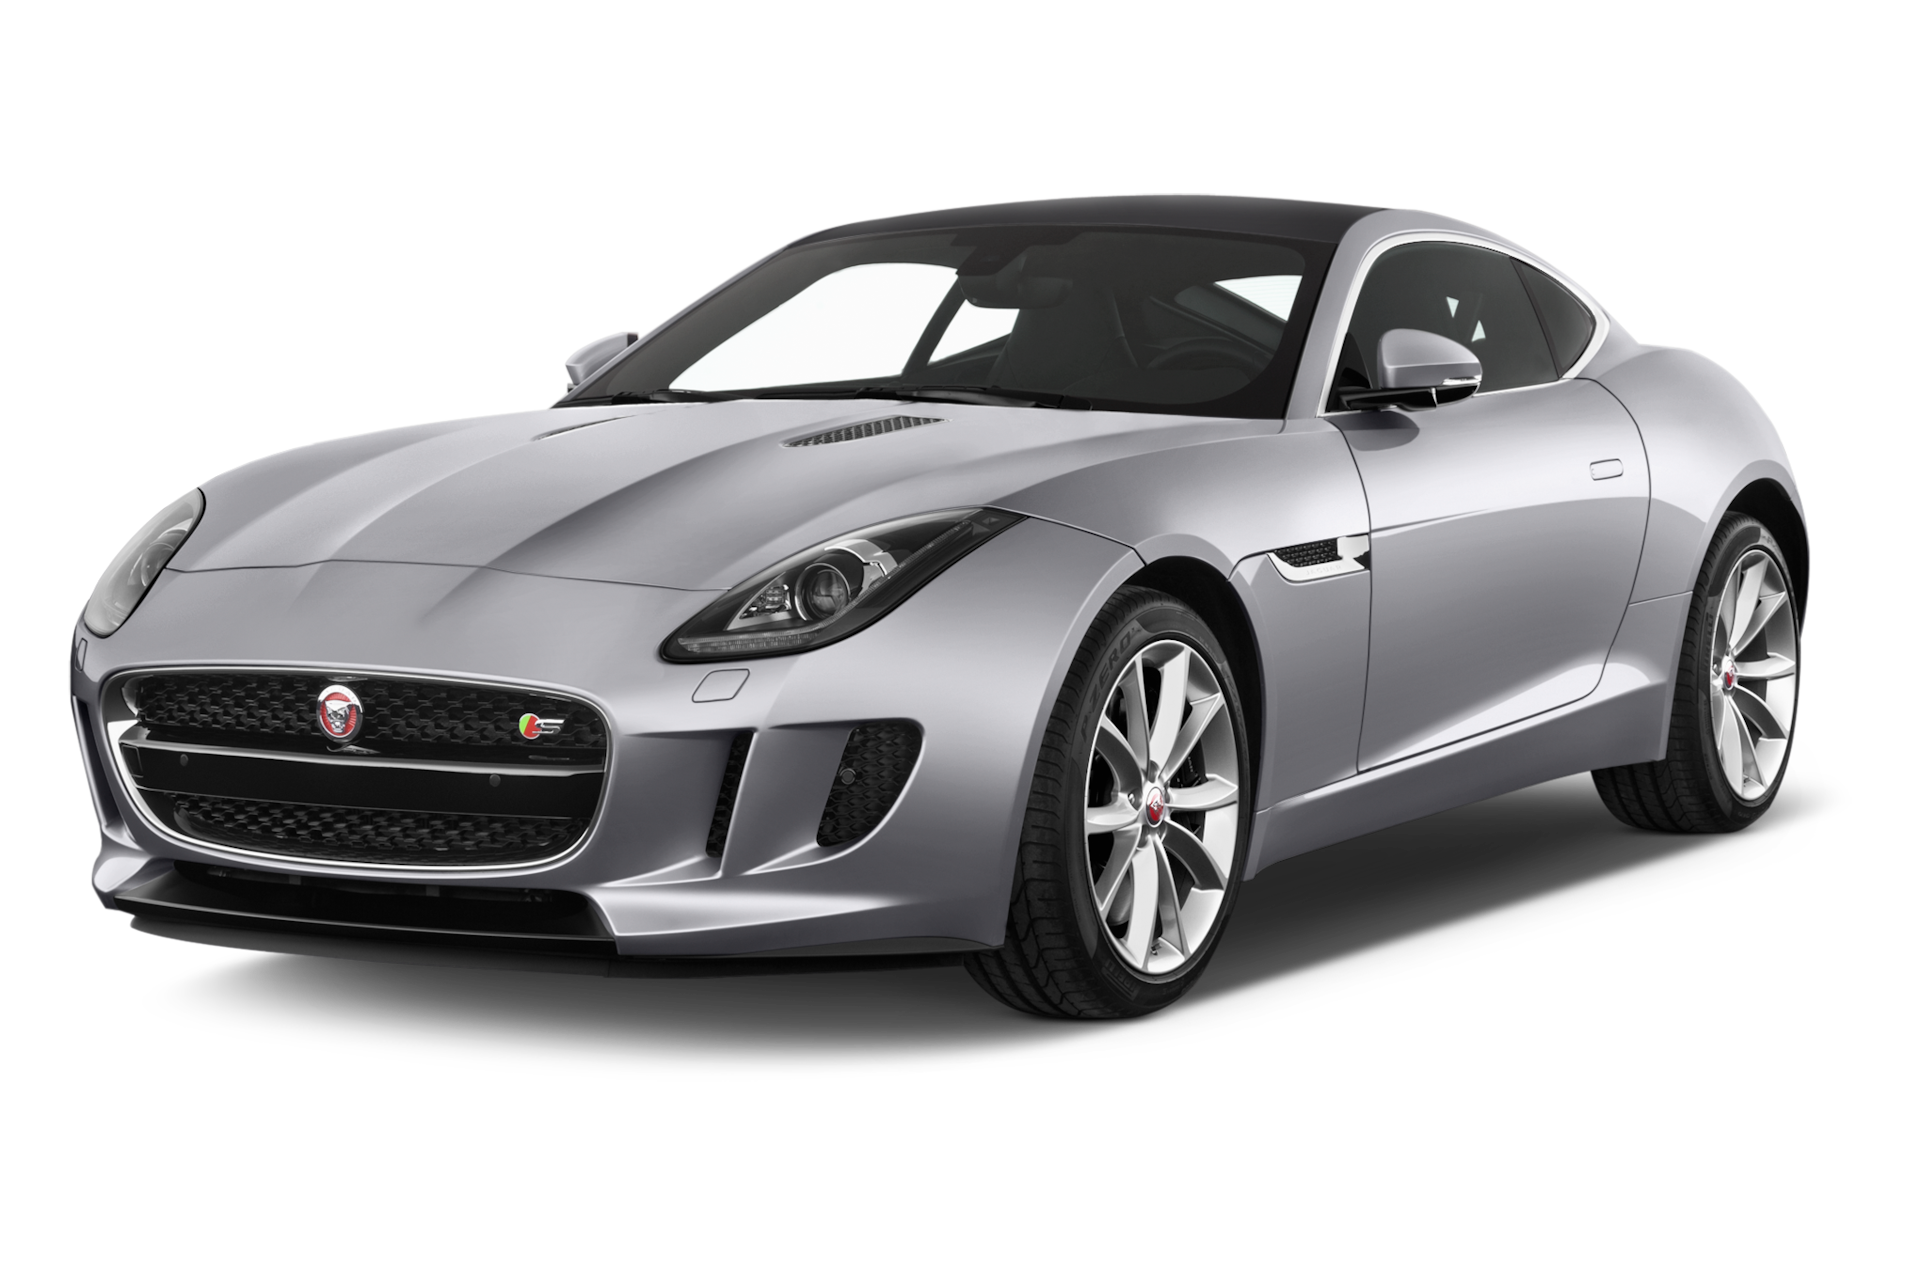 2015 Jaguar F-Type Prices, Reviews, and Photos - MotorTrend